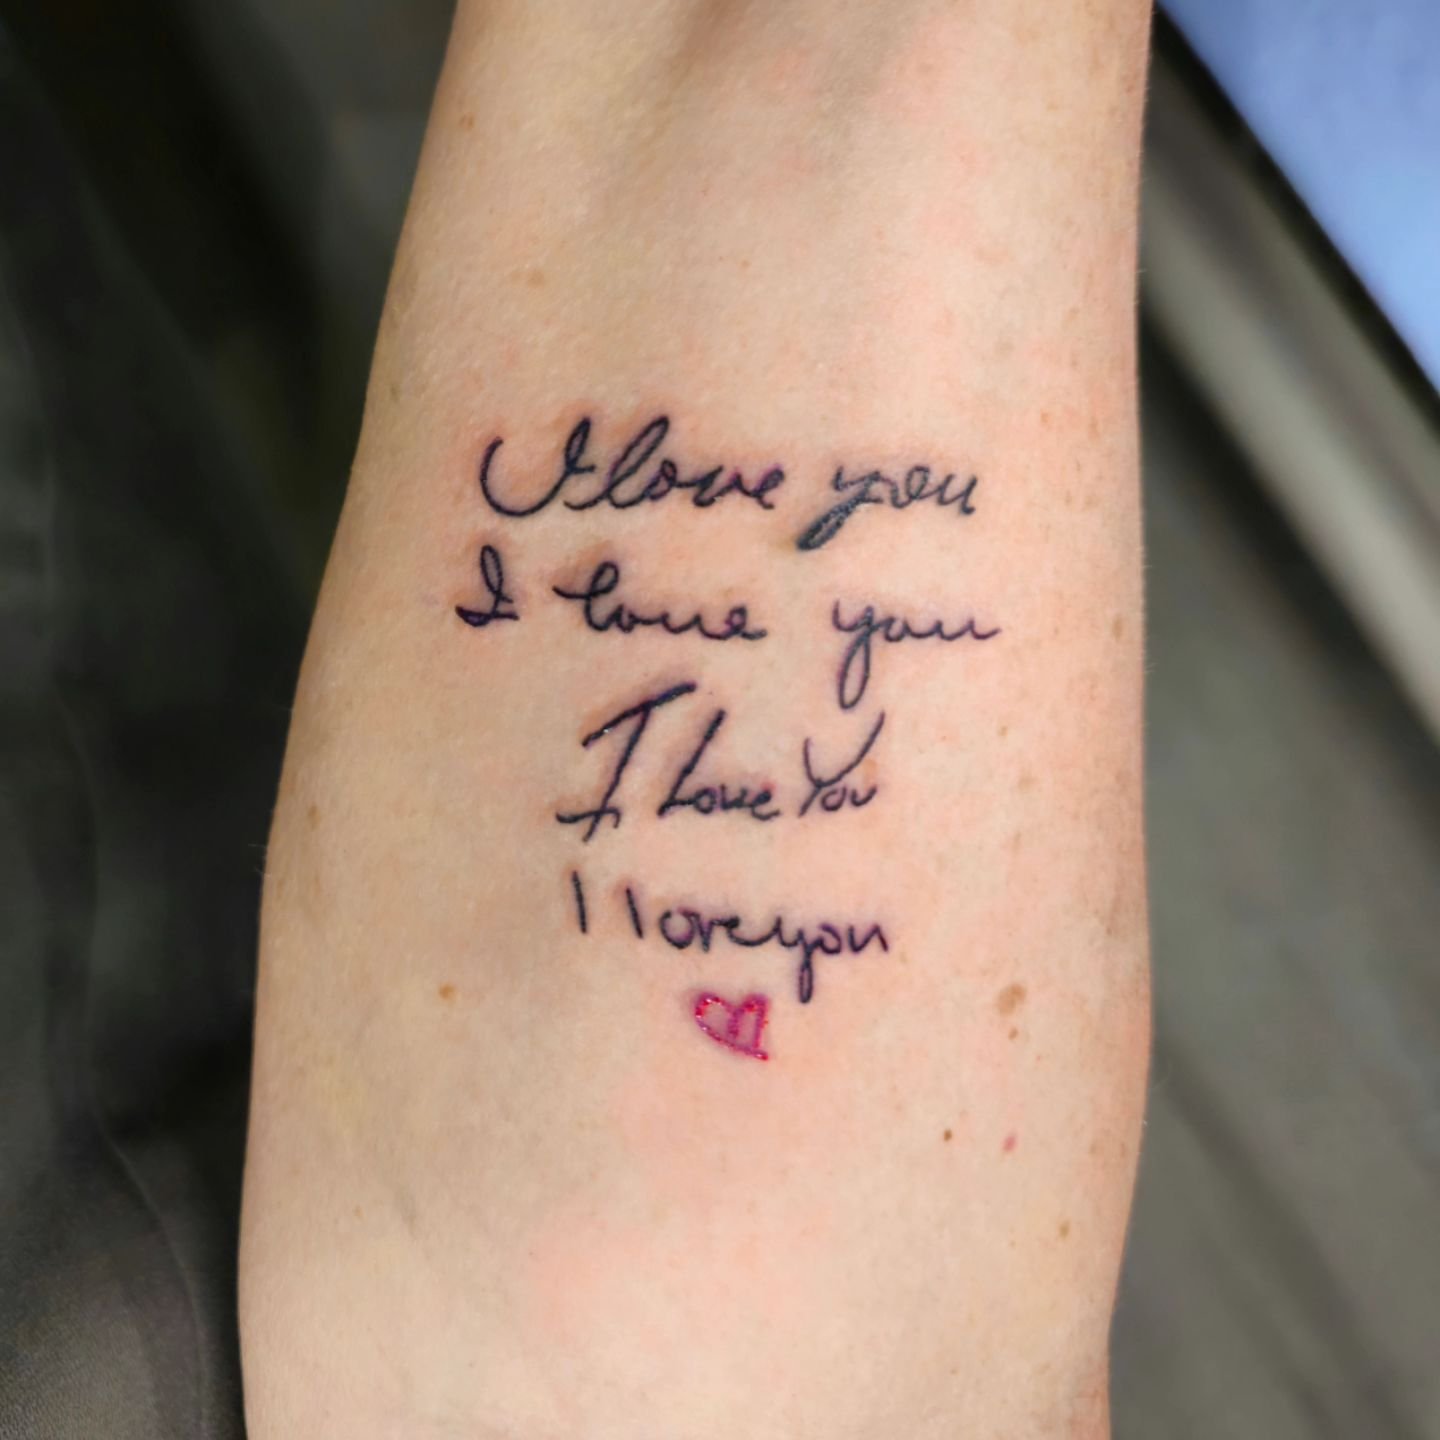 I love you, all handwritten by those important and loved.

Thank you for trusting me with such a special piece. Love is what makes life so special, and I feel honored to have done this ❤️

Find me at @robotpiercingtattoo